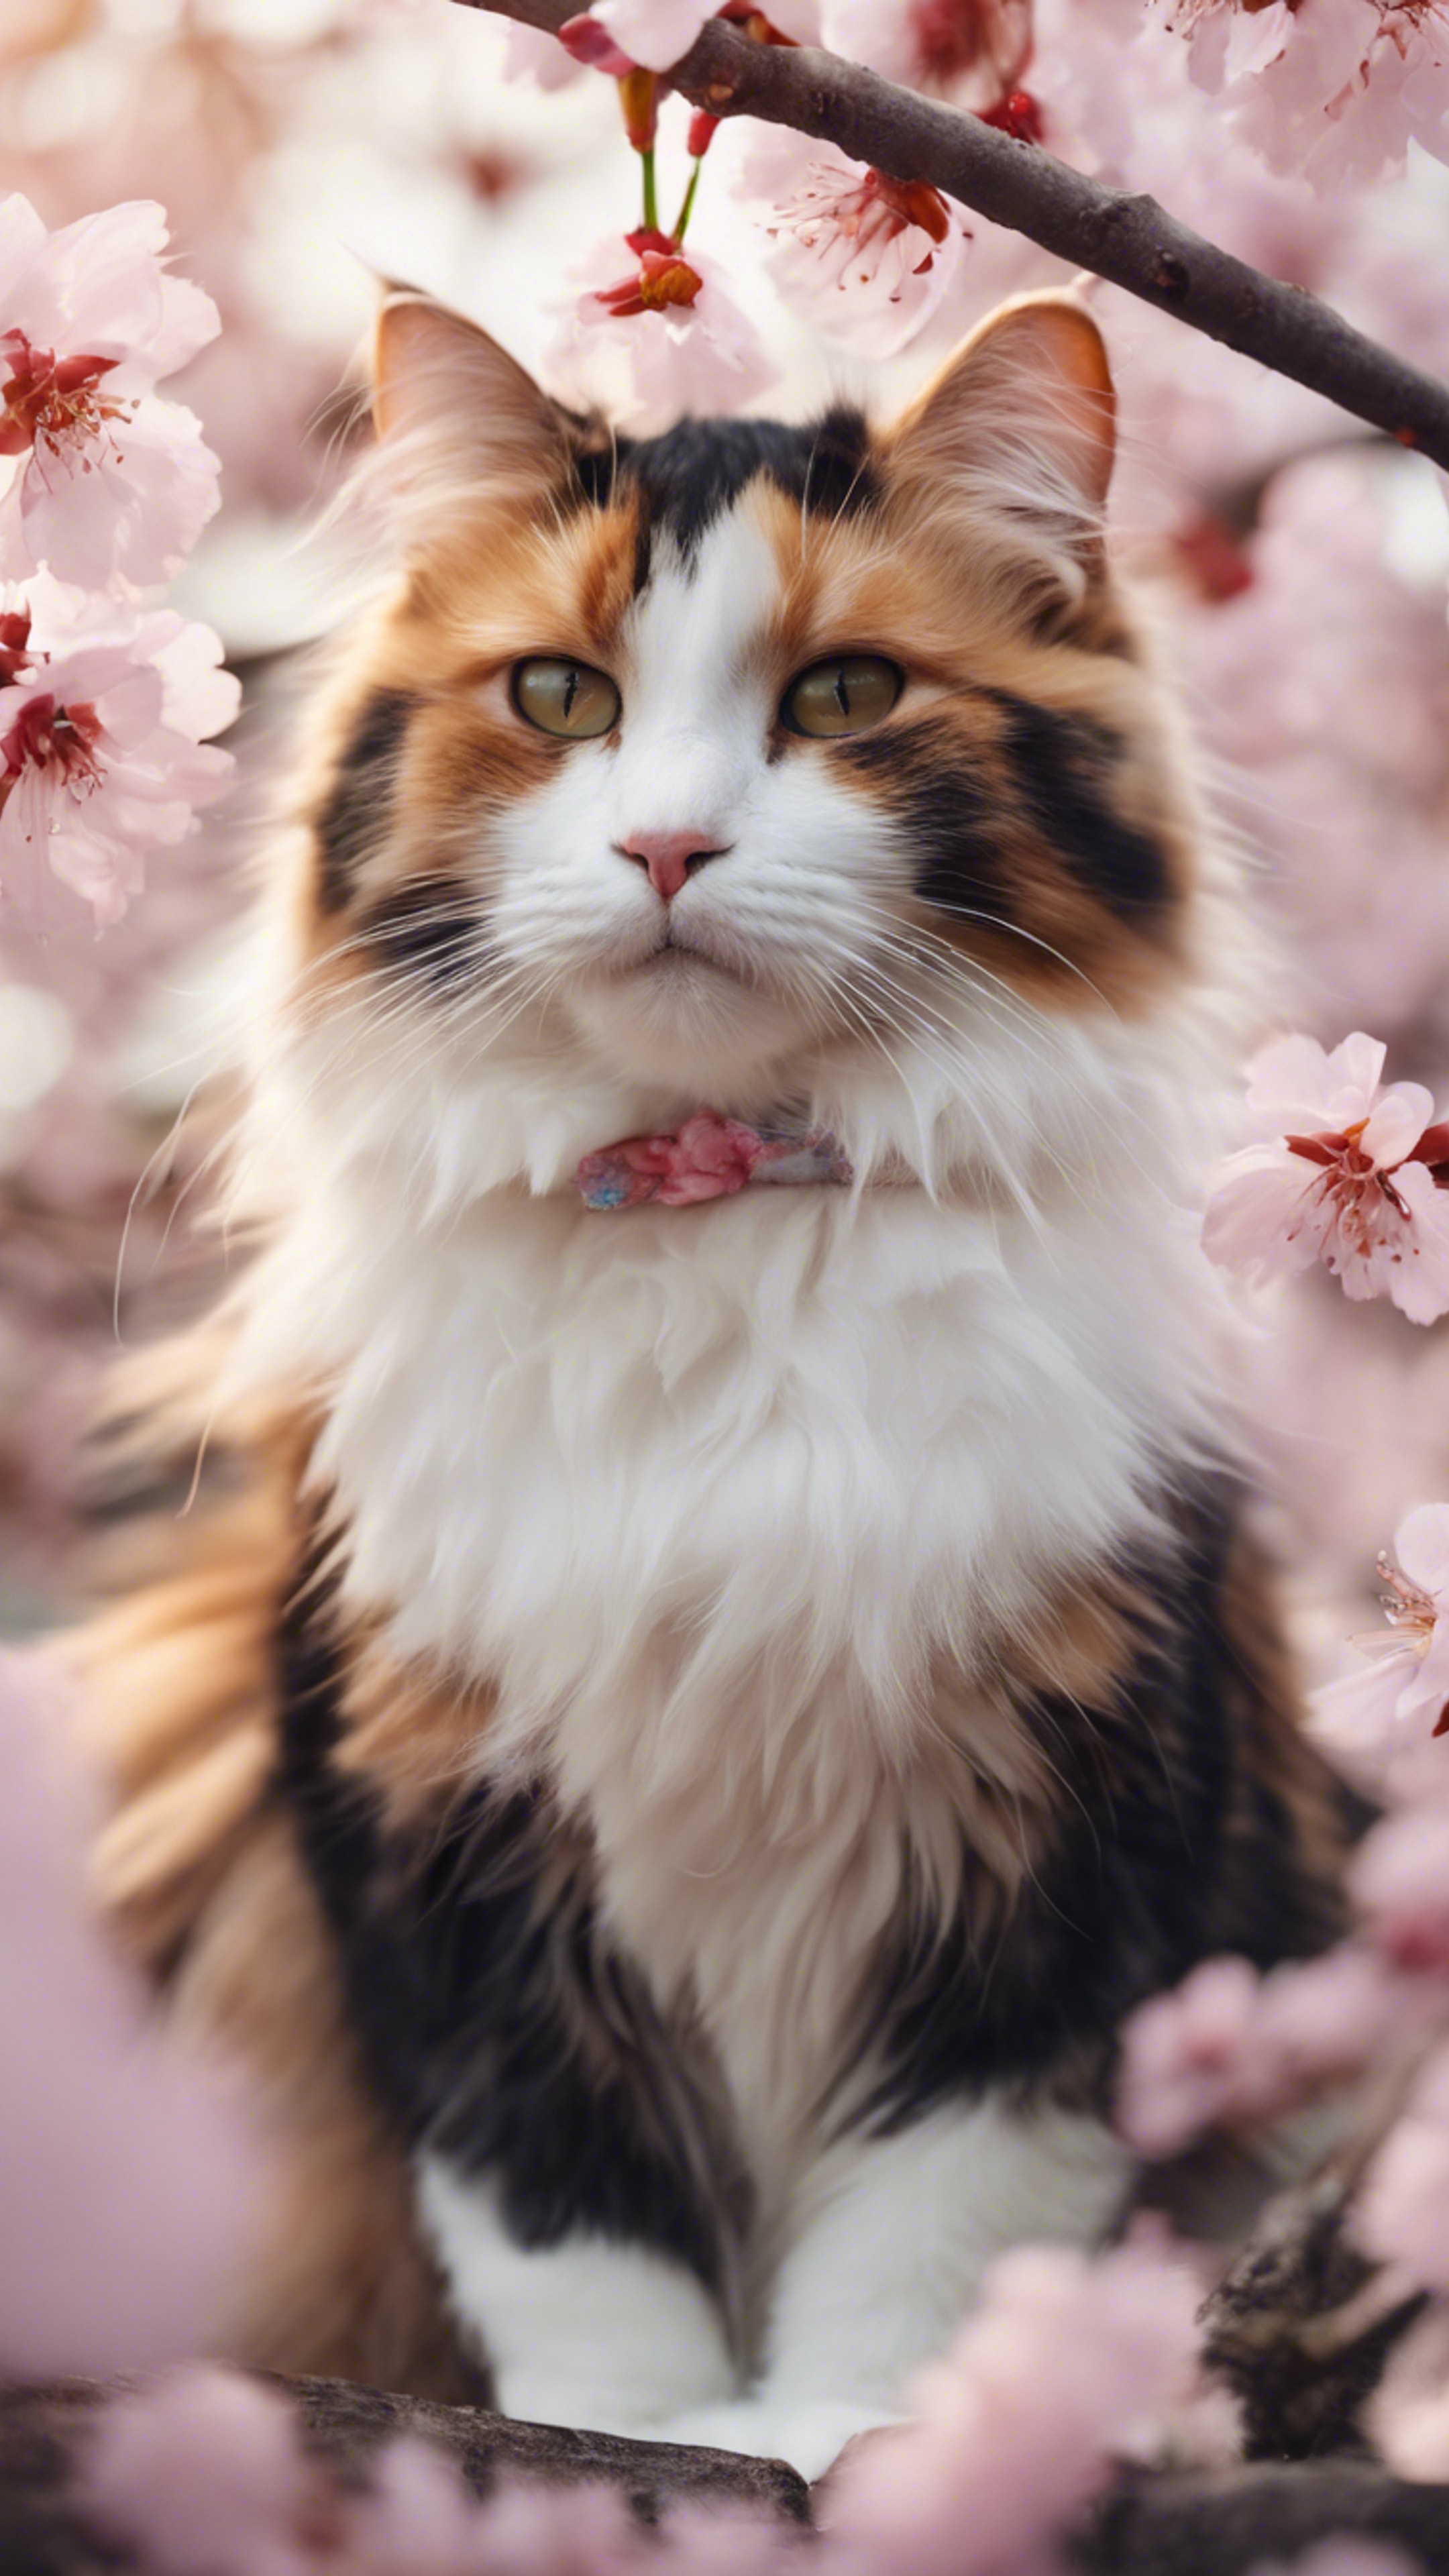 A fluffy calico cat in a cute pose sitting amongst cherry blossoms. Tapetai[3cf3847c7c9c4f38aba7]